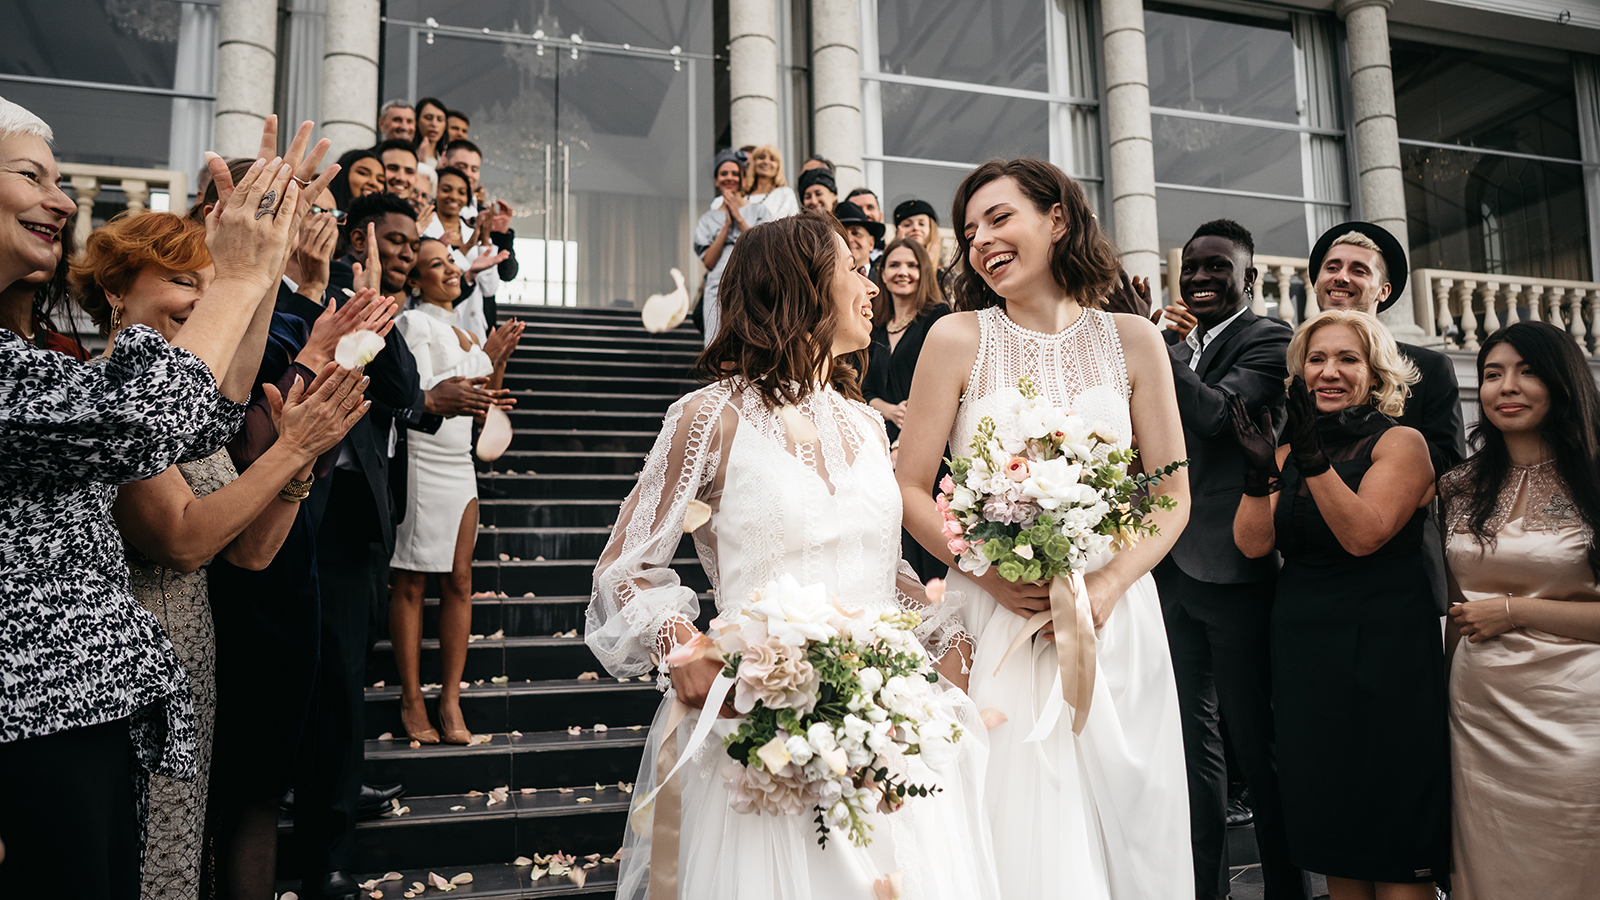 Candid shot of two female lesbian LGBT brides walking down the stairs during their wedding ceremony, guest clapping and cheering